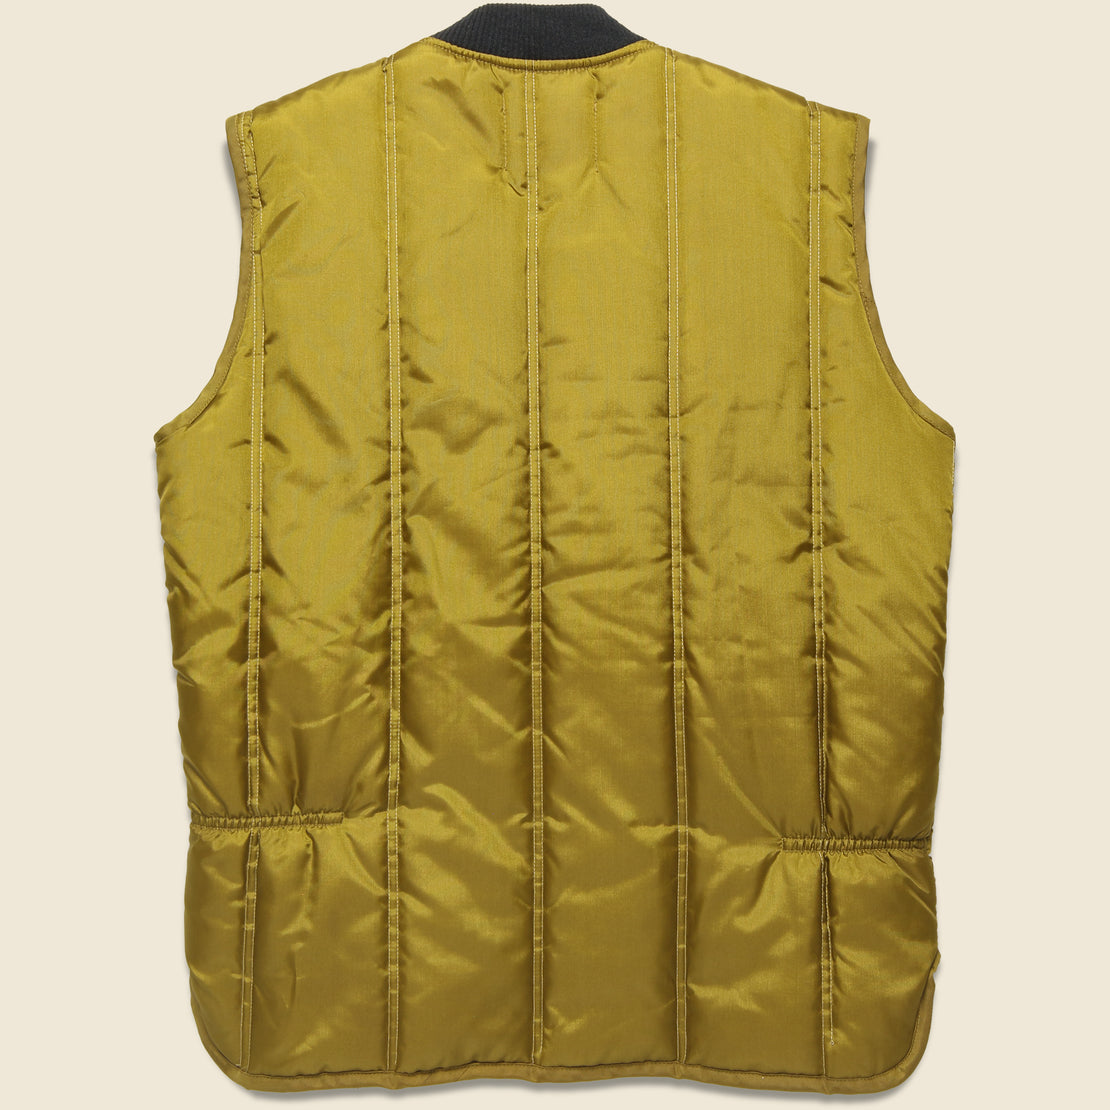 1980s Channel Quilted Vest - Vintage - STAG Provisions - One & Done - Apparel